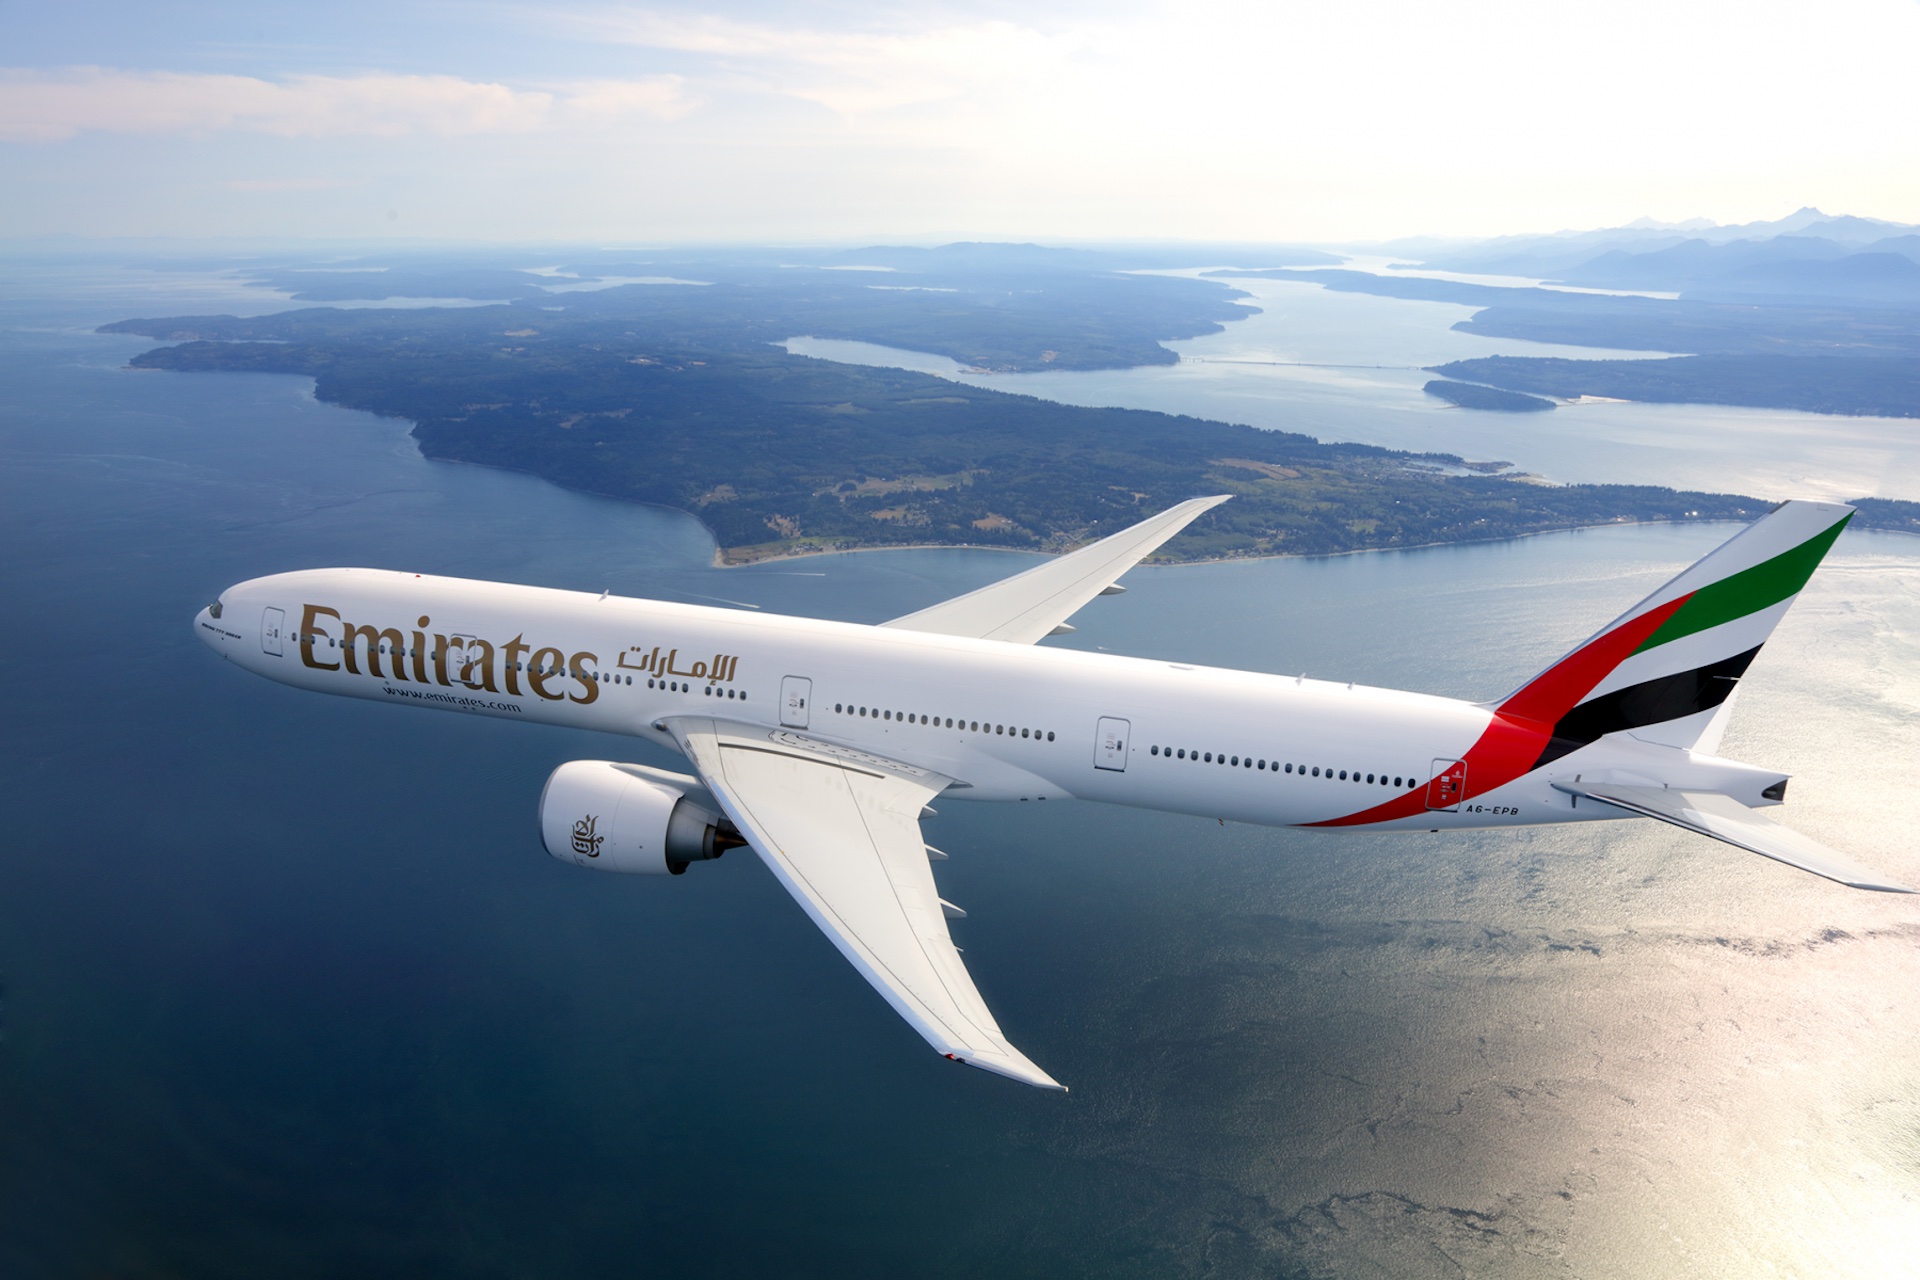 Emirates is set to launch flights to Tel Aviv on 23 June